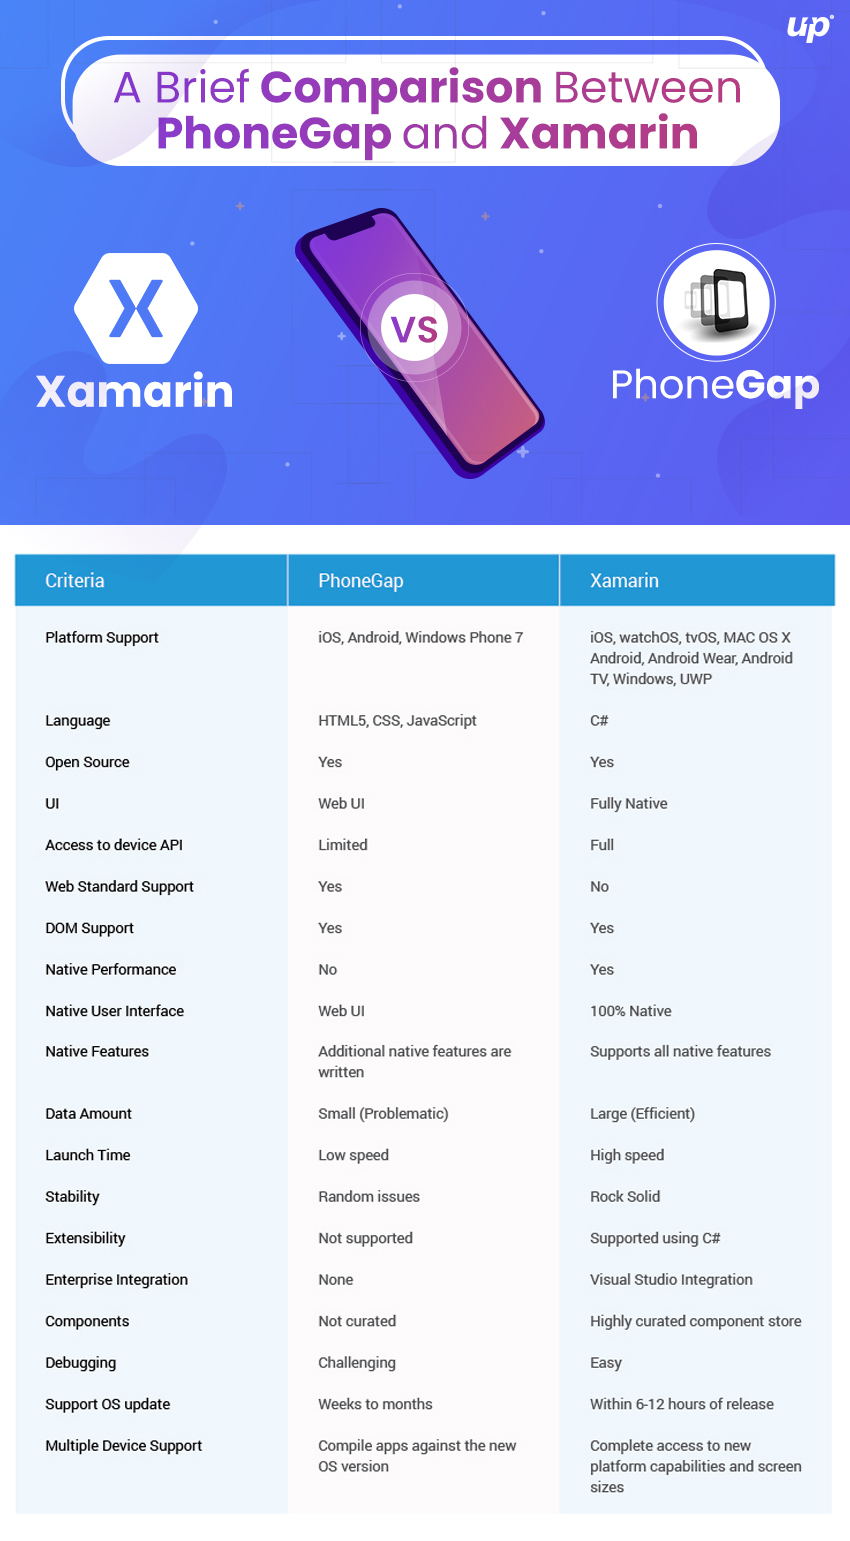 Xamarin vs. PhoneGap: Which One to Choose?